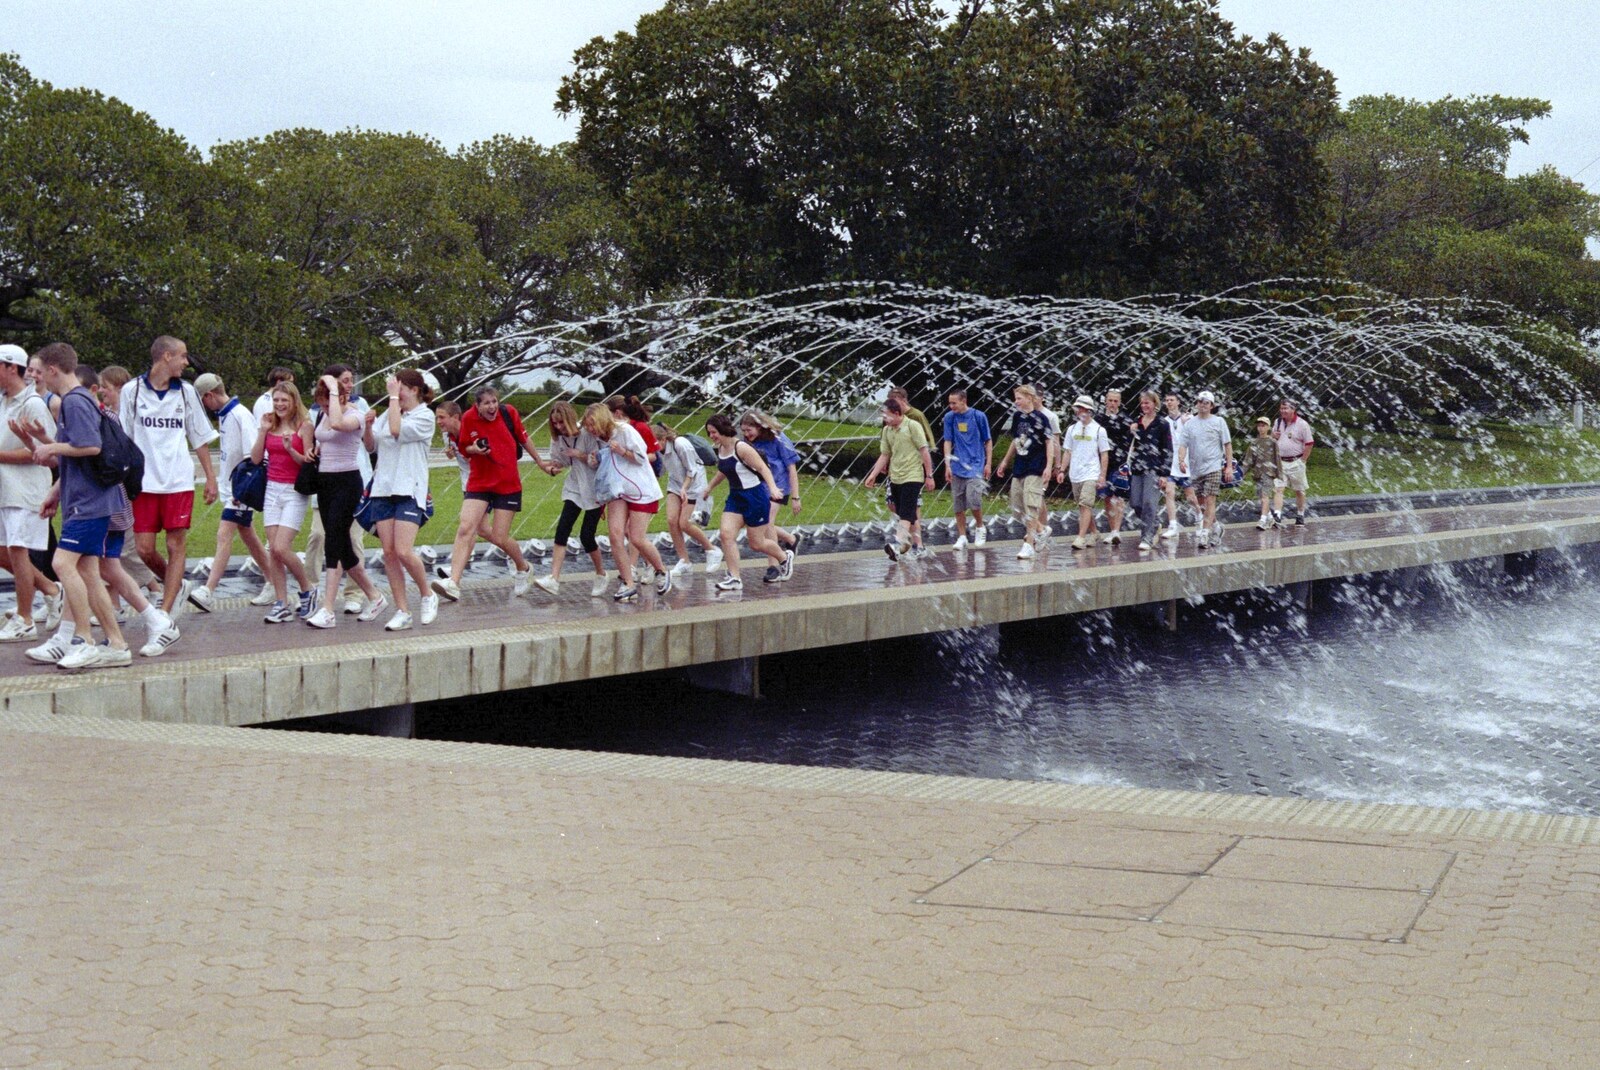 A tour group runs under some fountains from A Postcard From Hofburg Palace, Vienna, Austria - 18th April 2000